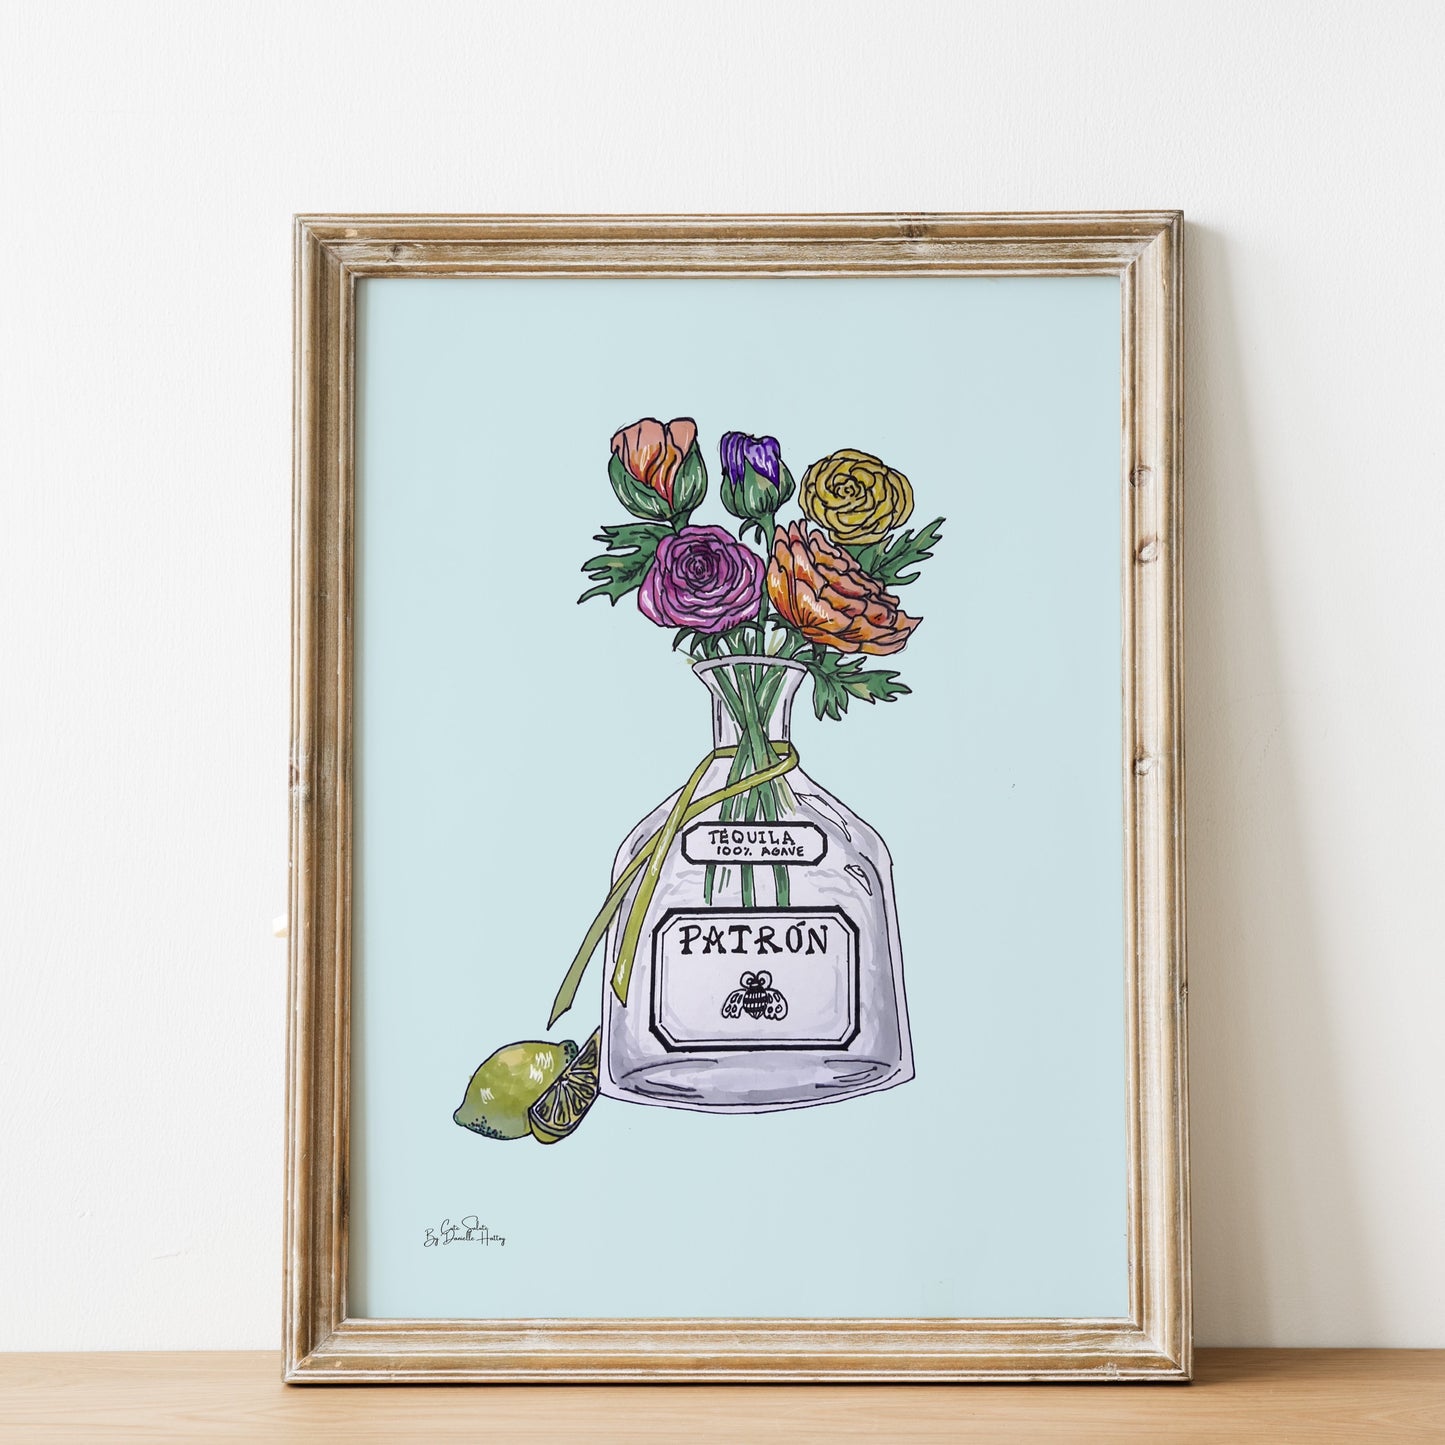 Patron Tequila Illustrated Wall Art Print